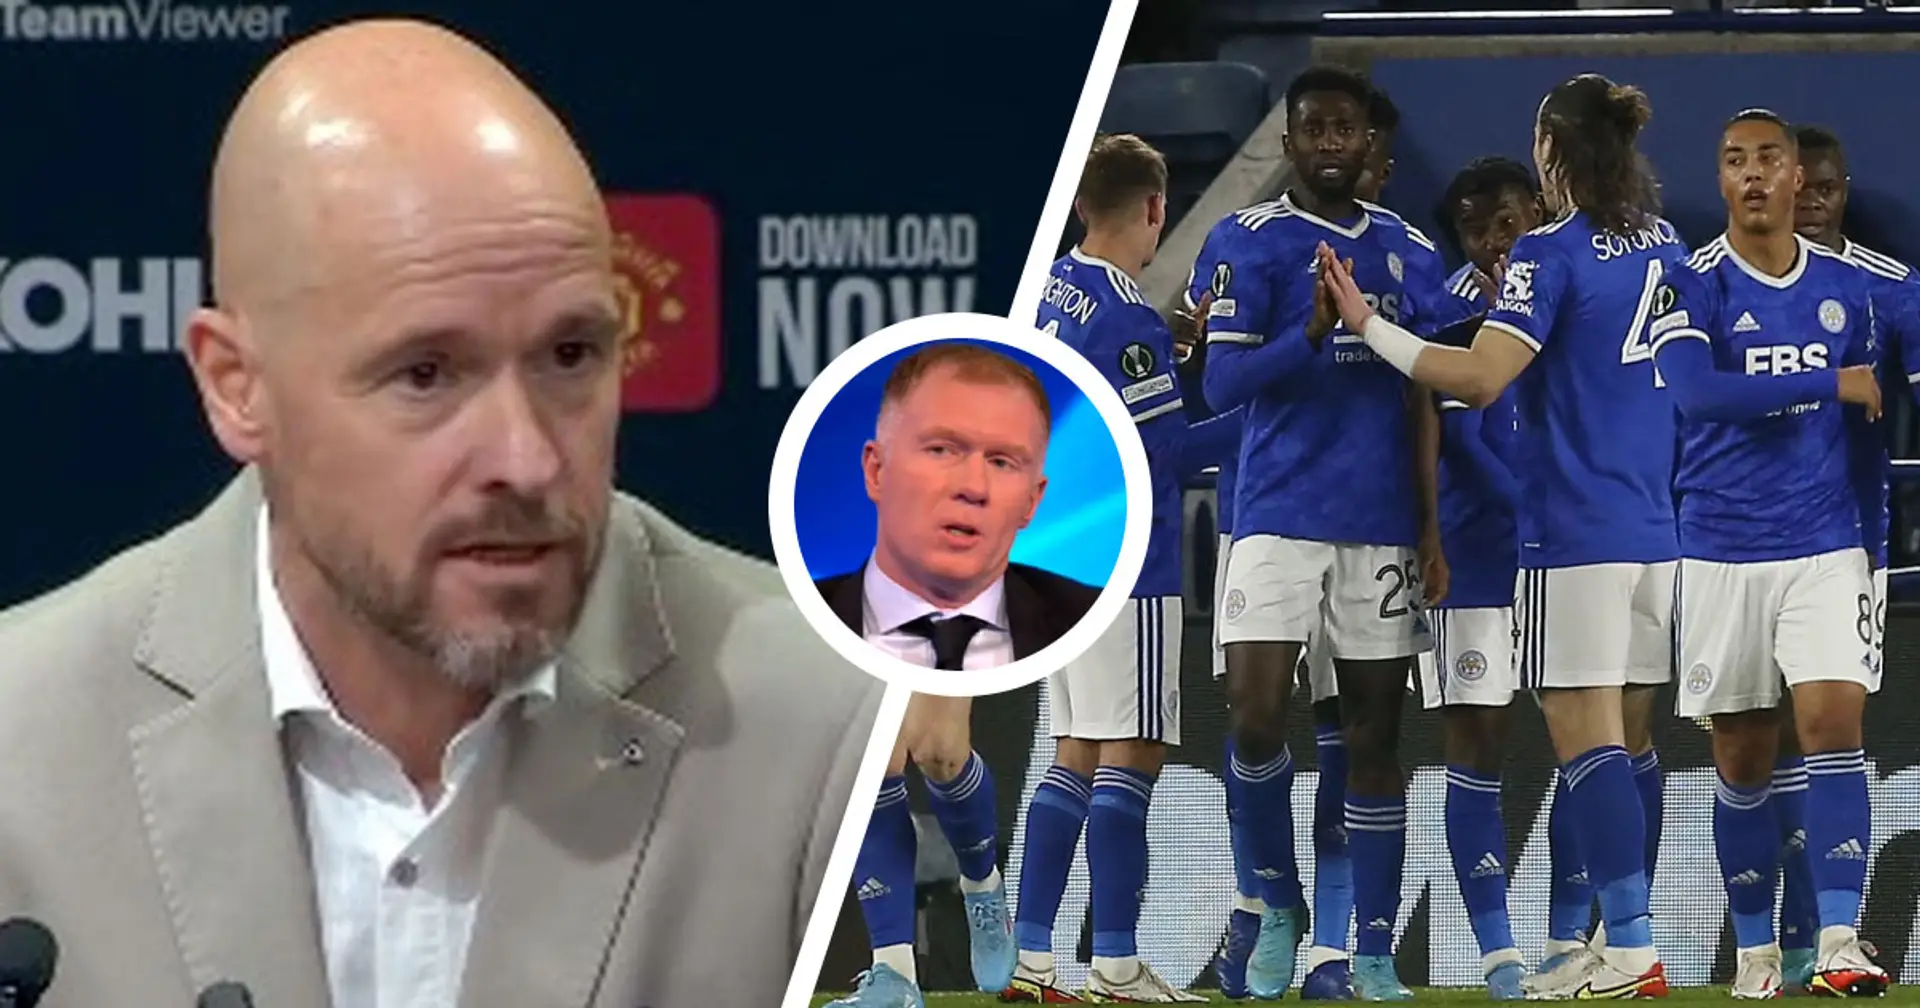 Paul Scholes reveals which Leicester City midfielder 'fits the bill' for Man United - it's not Maddison